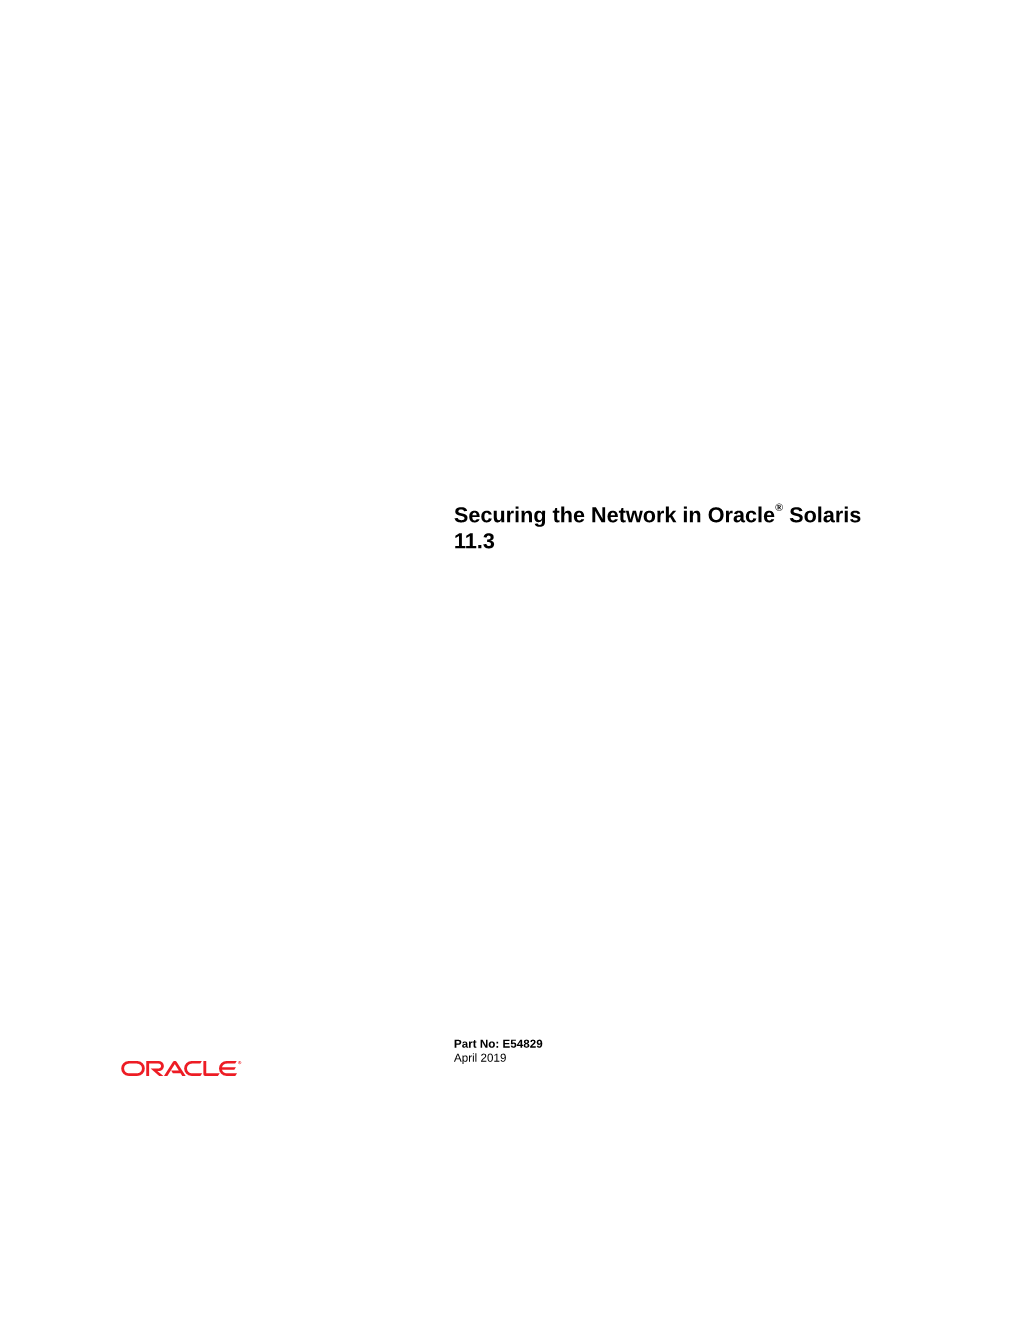 Securing the Network in Oracle® Solaris 11.3